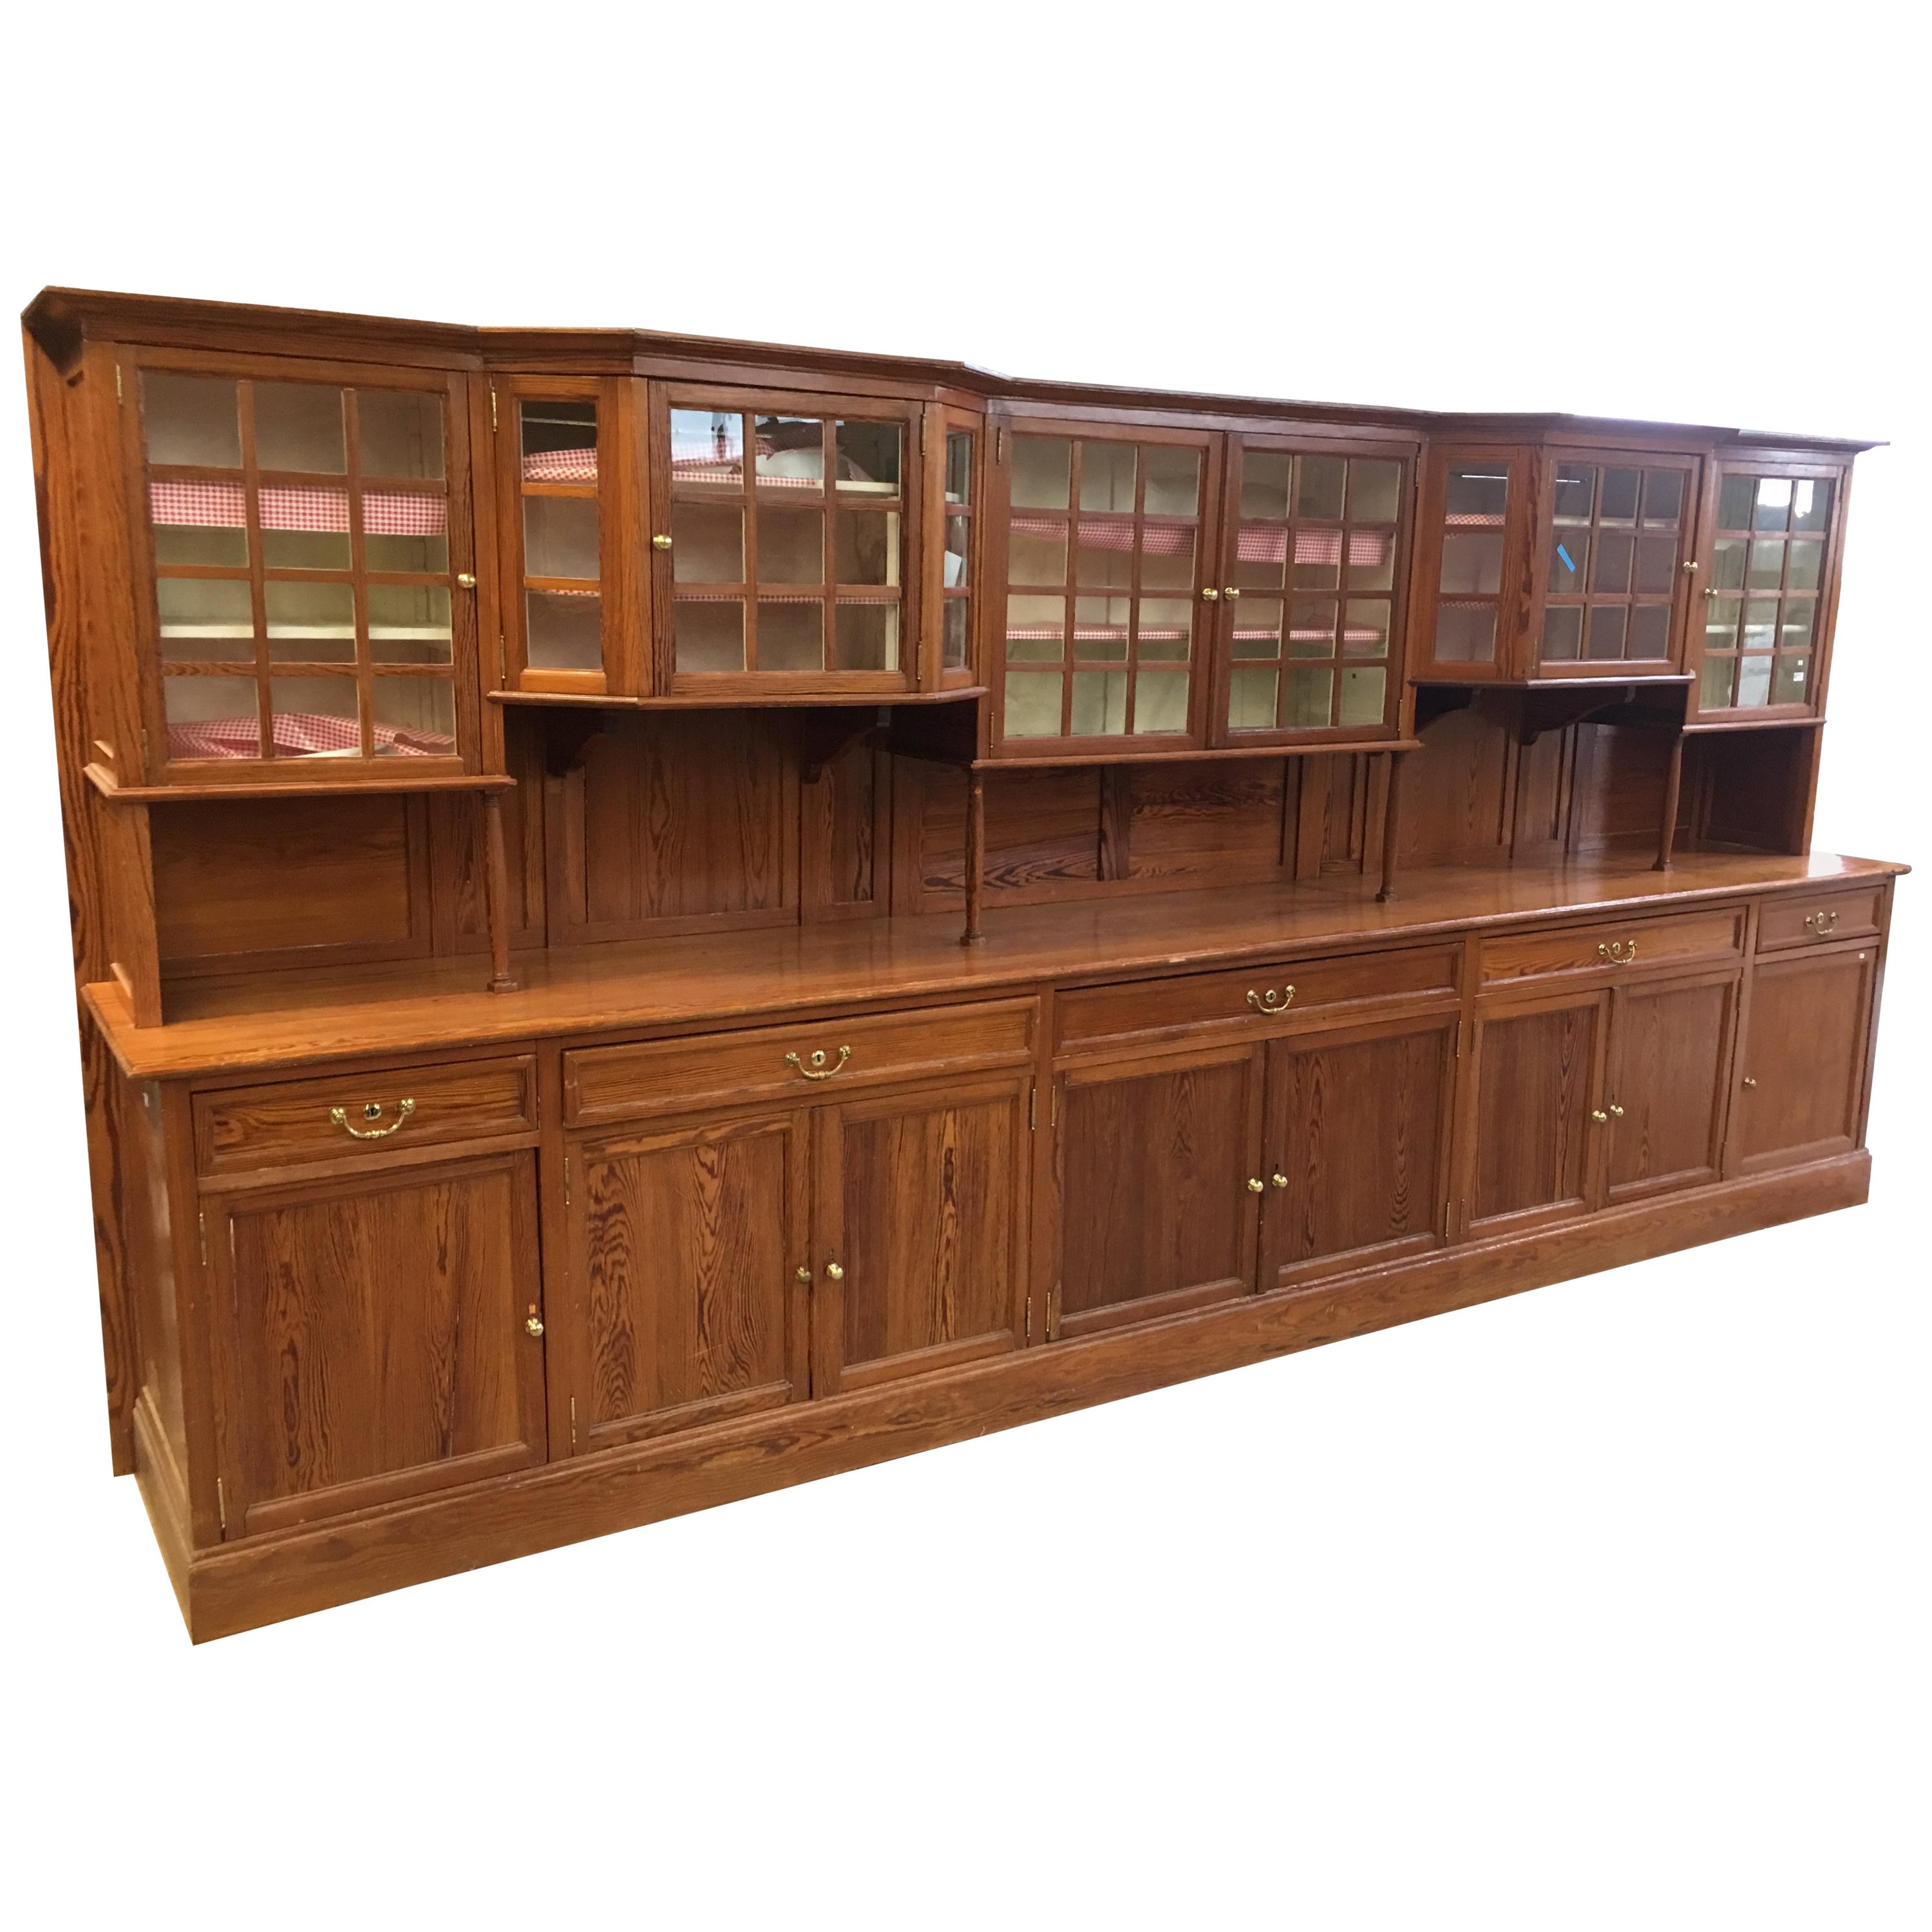 Exceptional Very Large Serving Furniture in Pitchpin, circa 1900